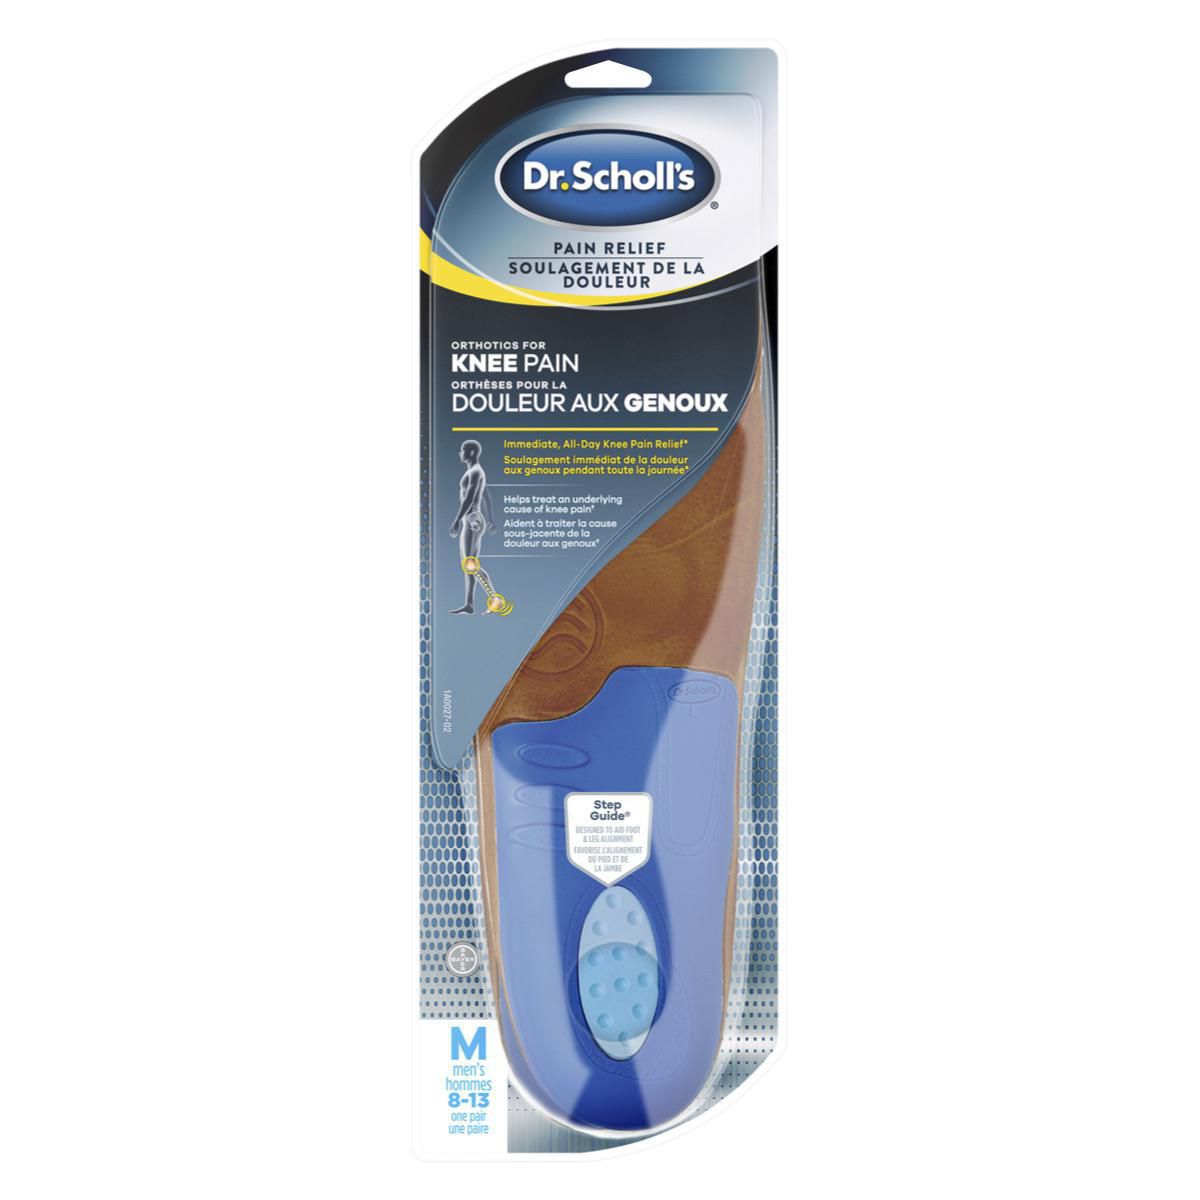 Pain Relief Orthotics for Knee Pain 